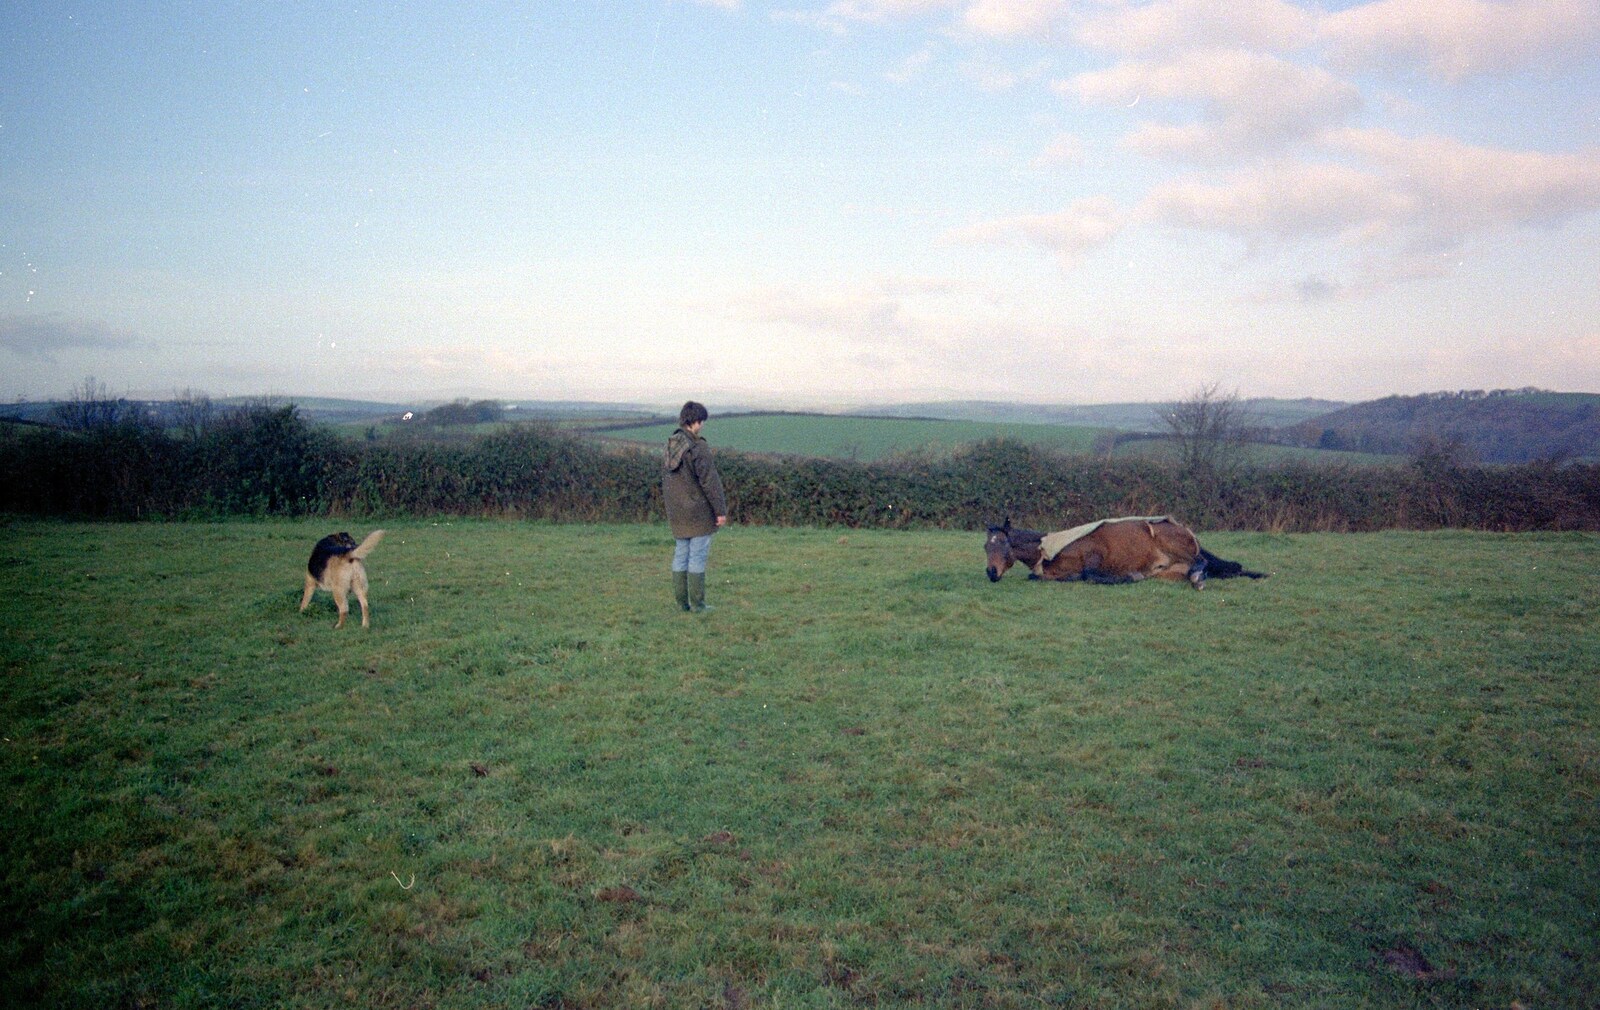 Oberon the horse lies down from Uni: Kate, A Lampshade and the Trees of Duloe, Plymouth and Cornwall - 2nd December 1988